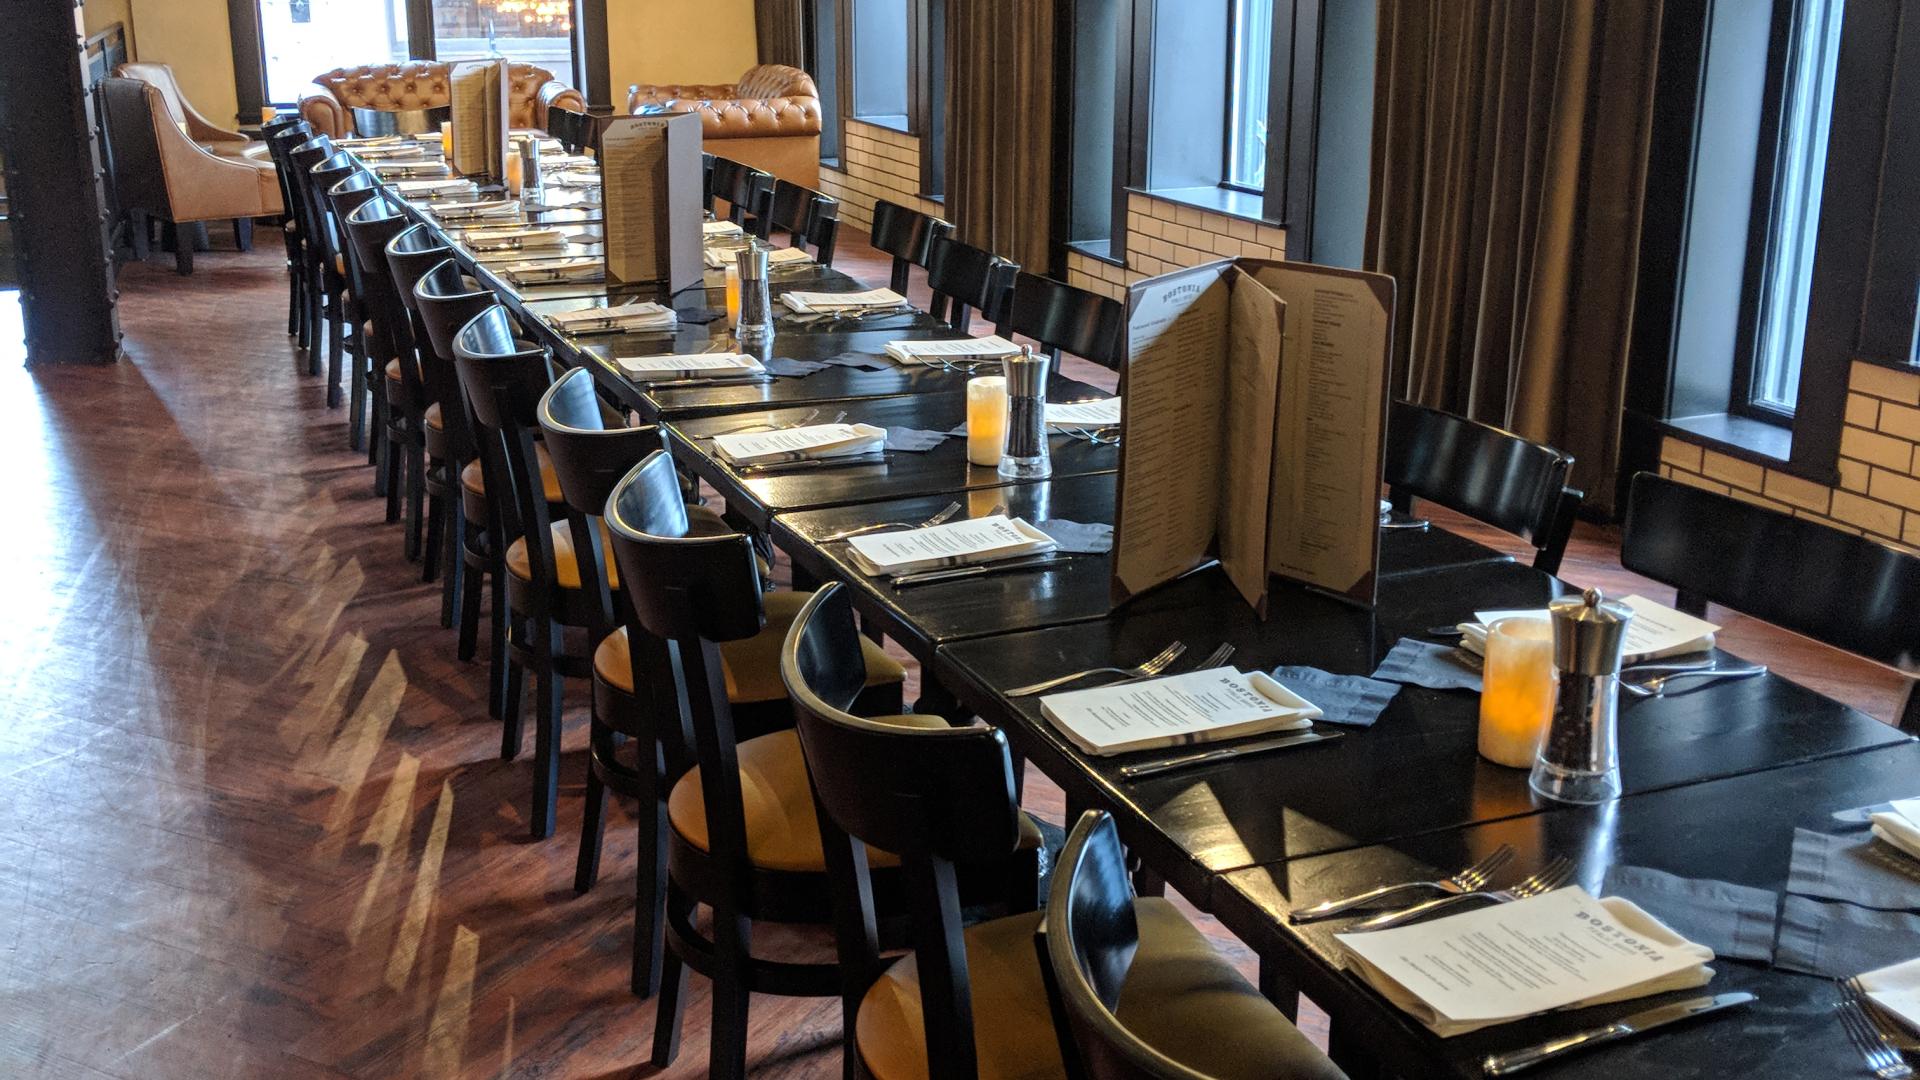 Restaurants with Private Rooms for Rent in Boston, MA